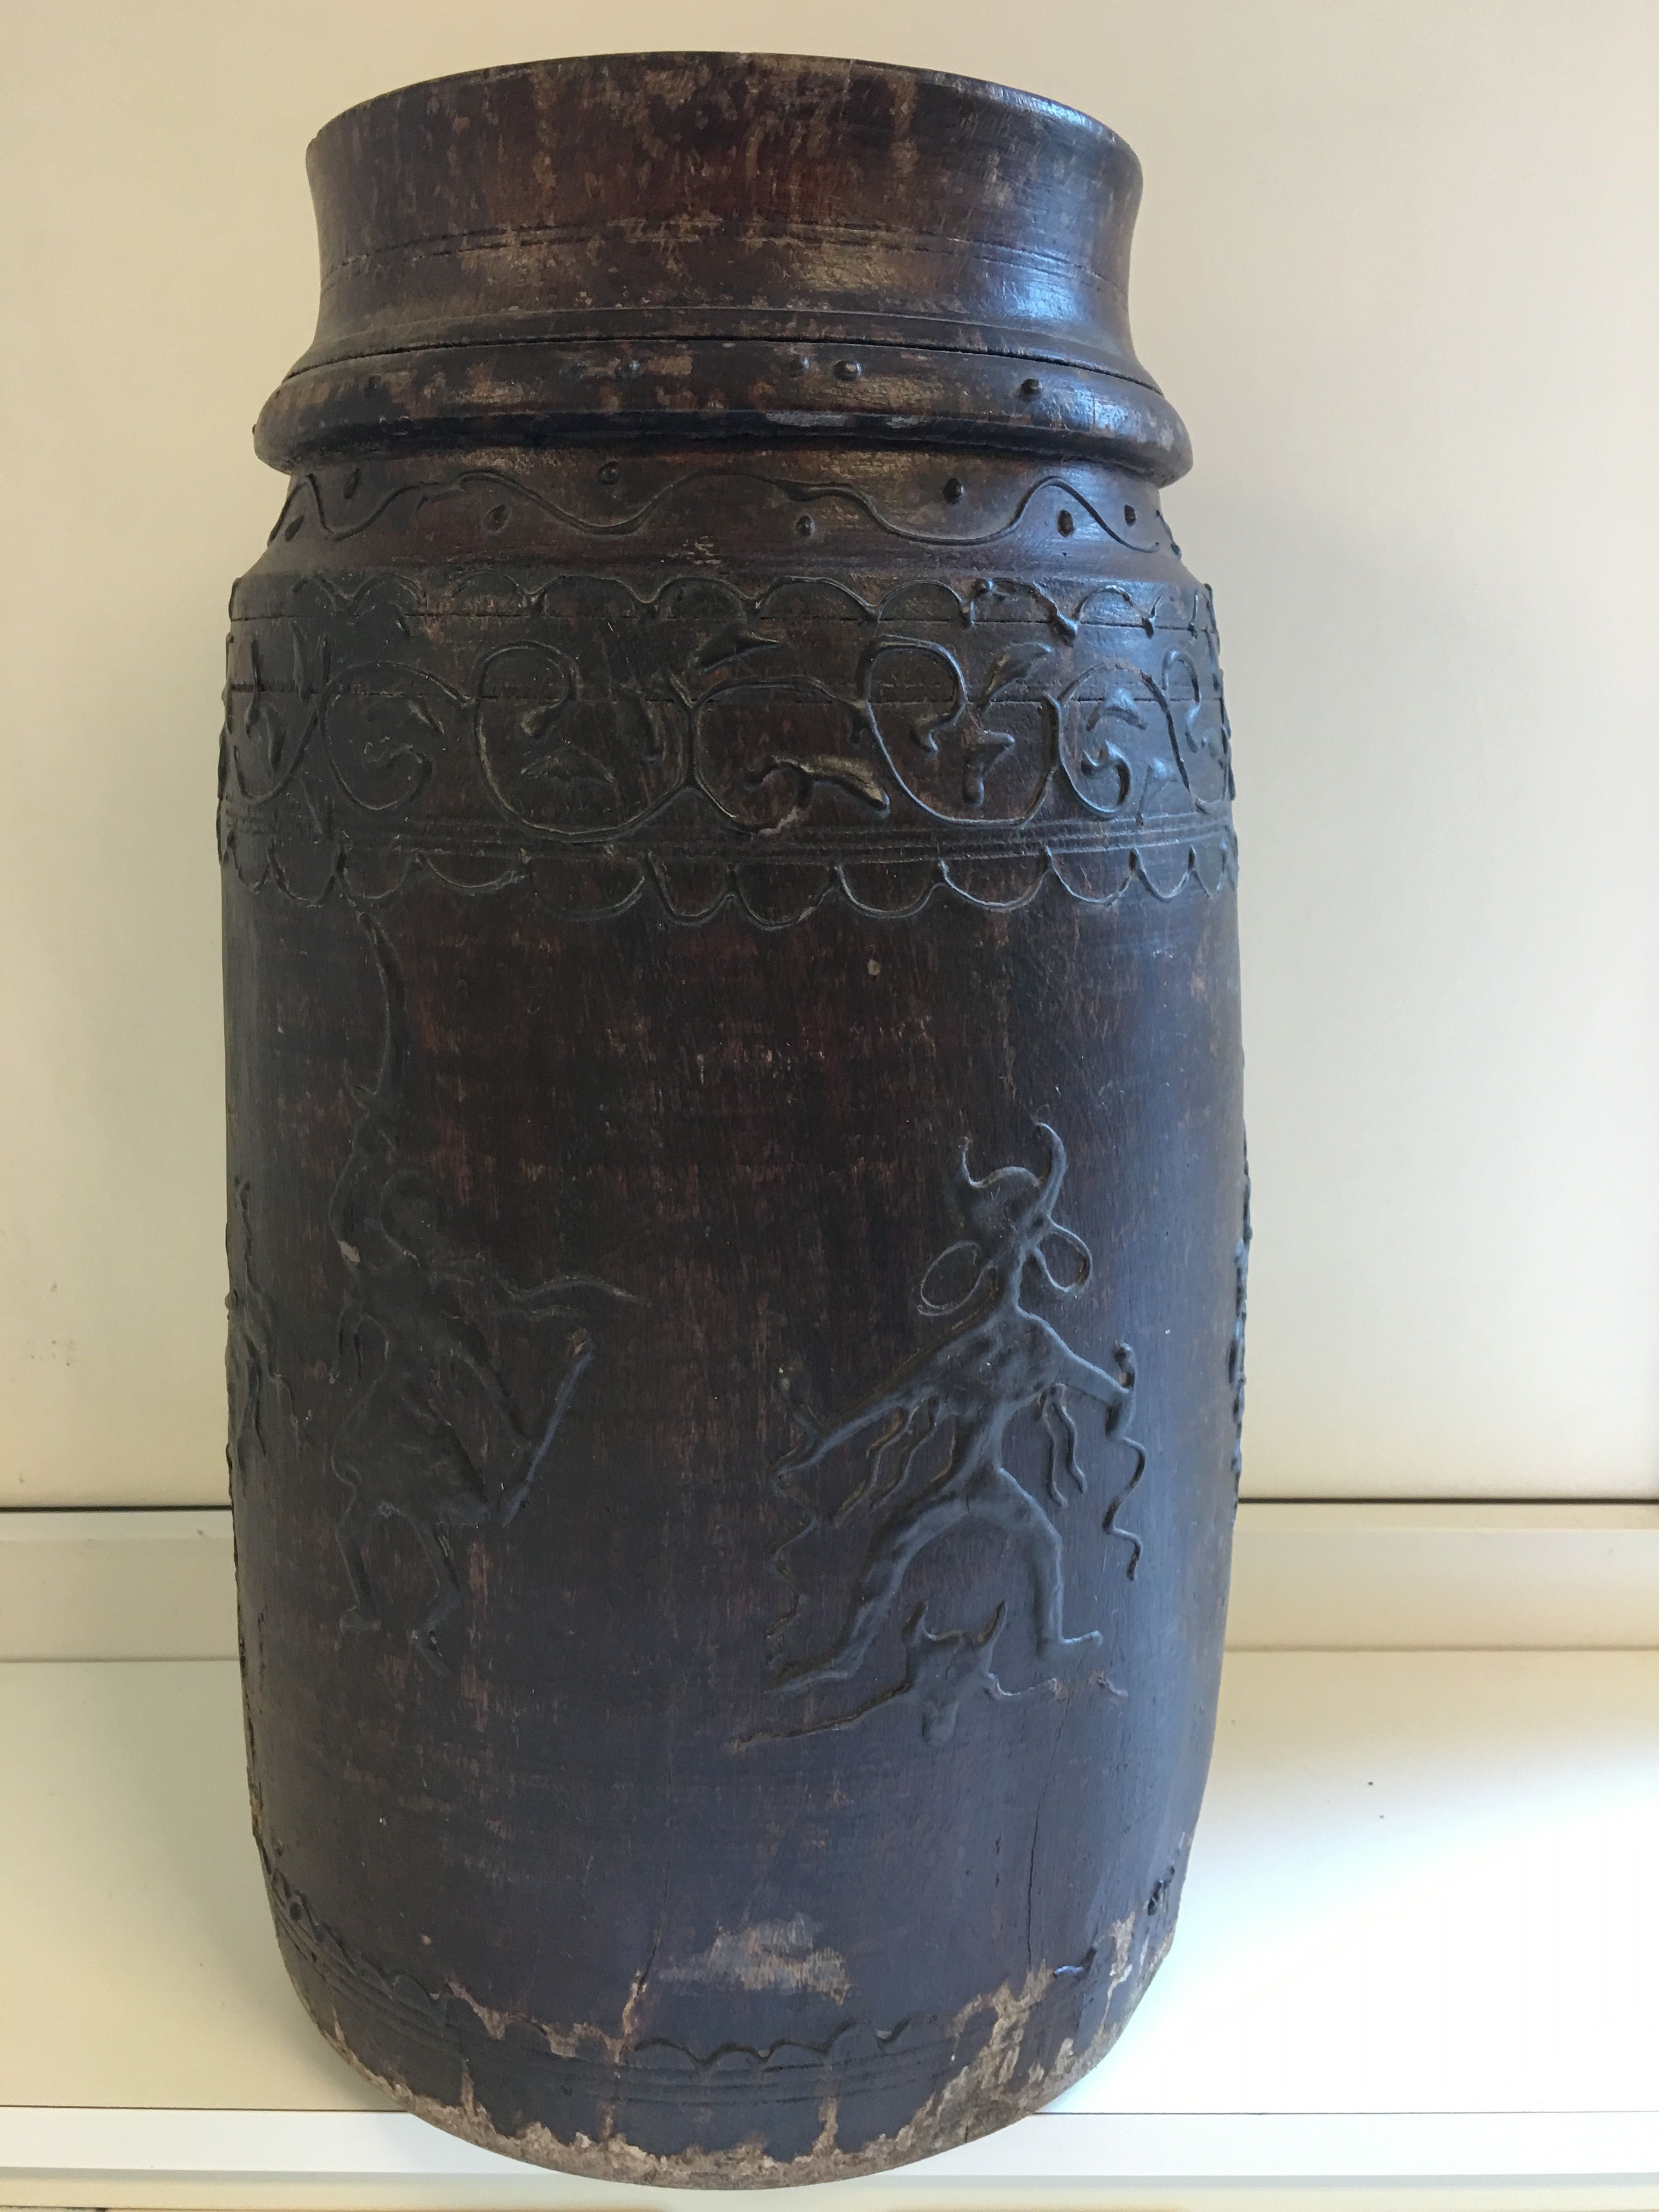 Authentic Indian water jug